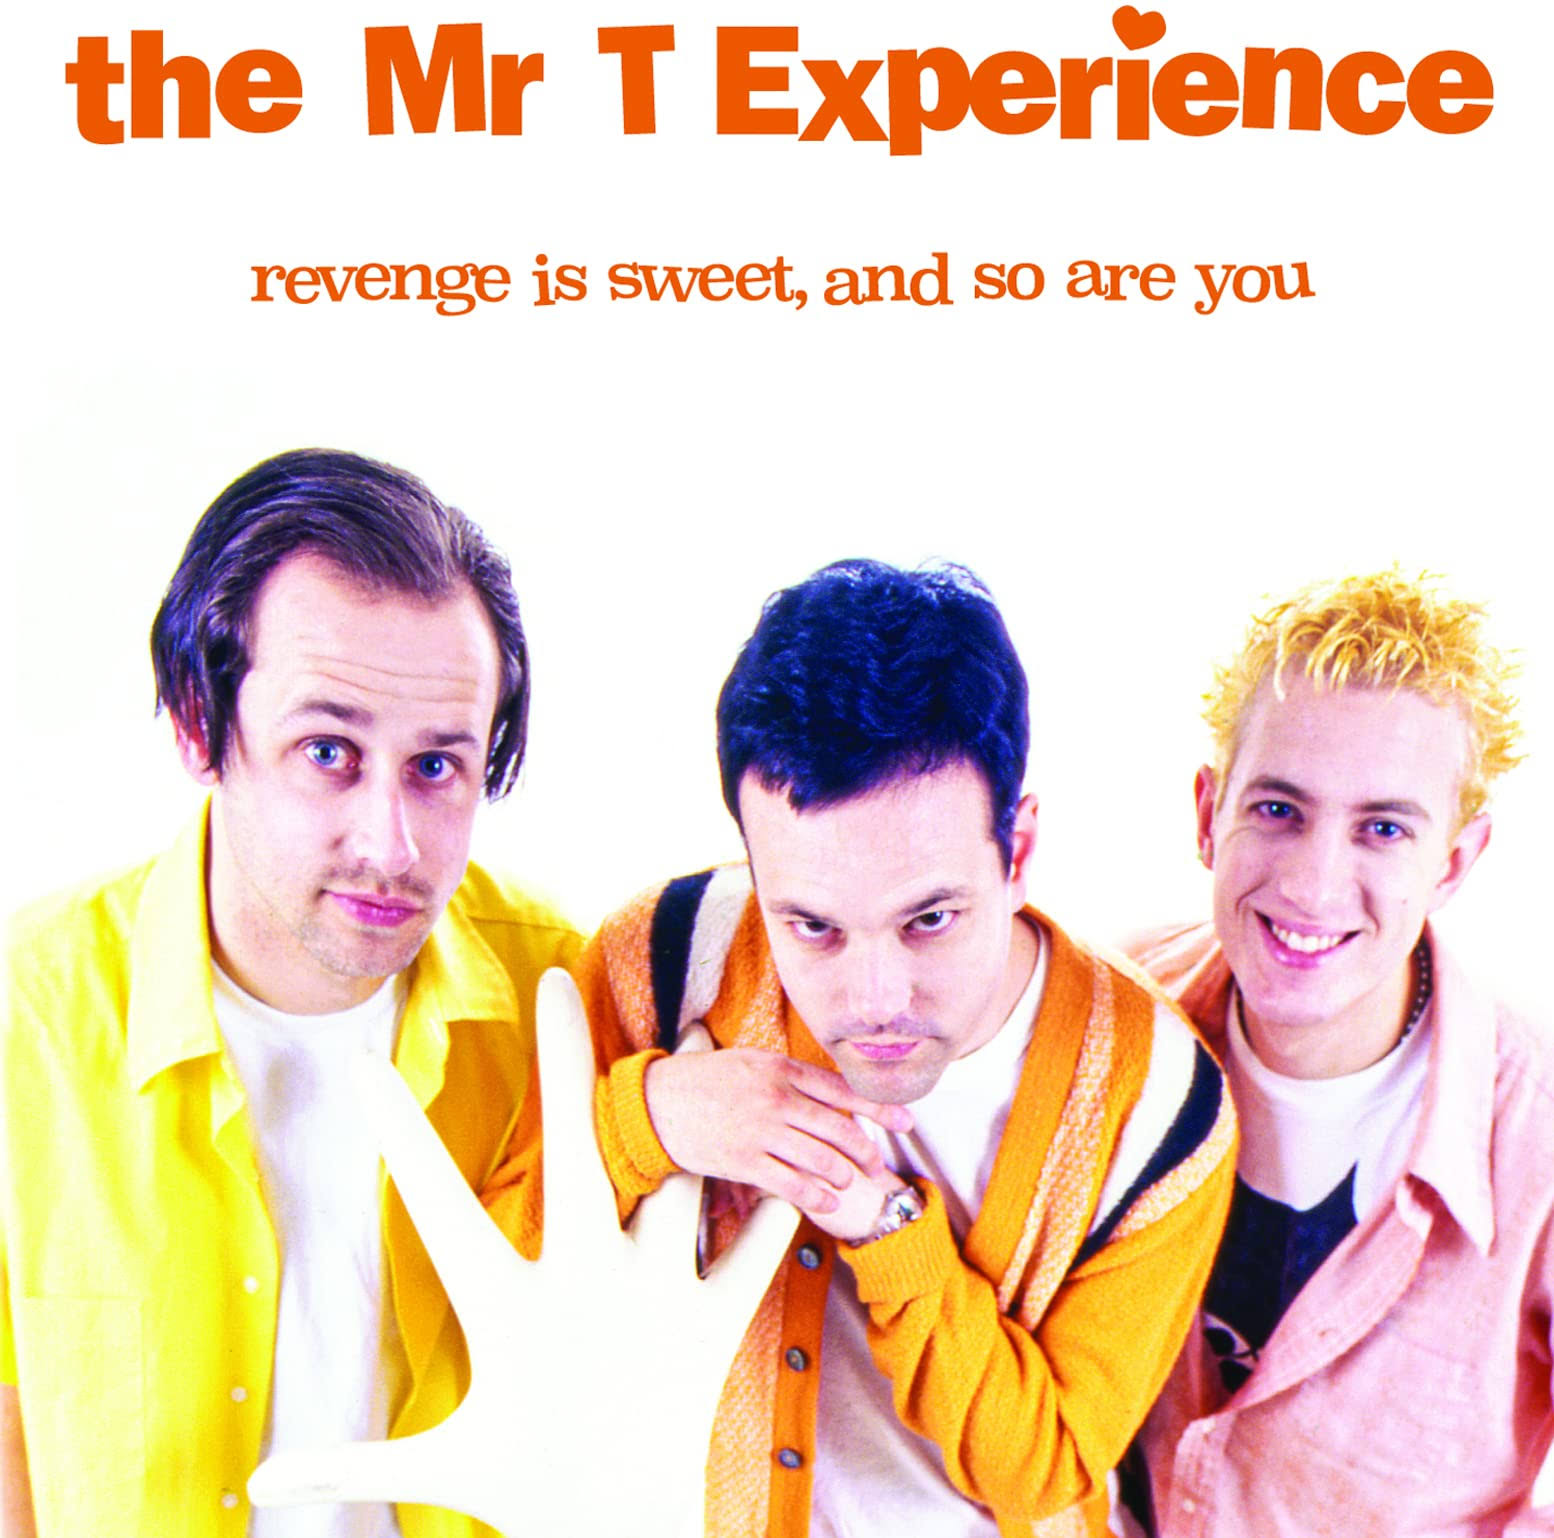 The Mr. T Experience - Revenge Is Sweet, and So Are You - Vinyl